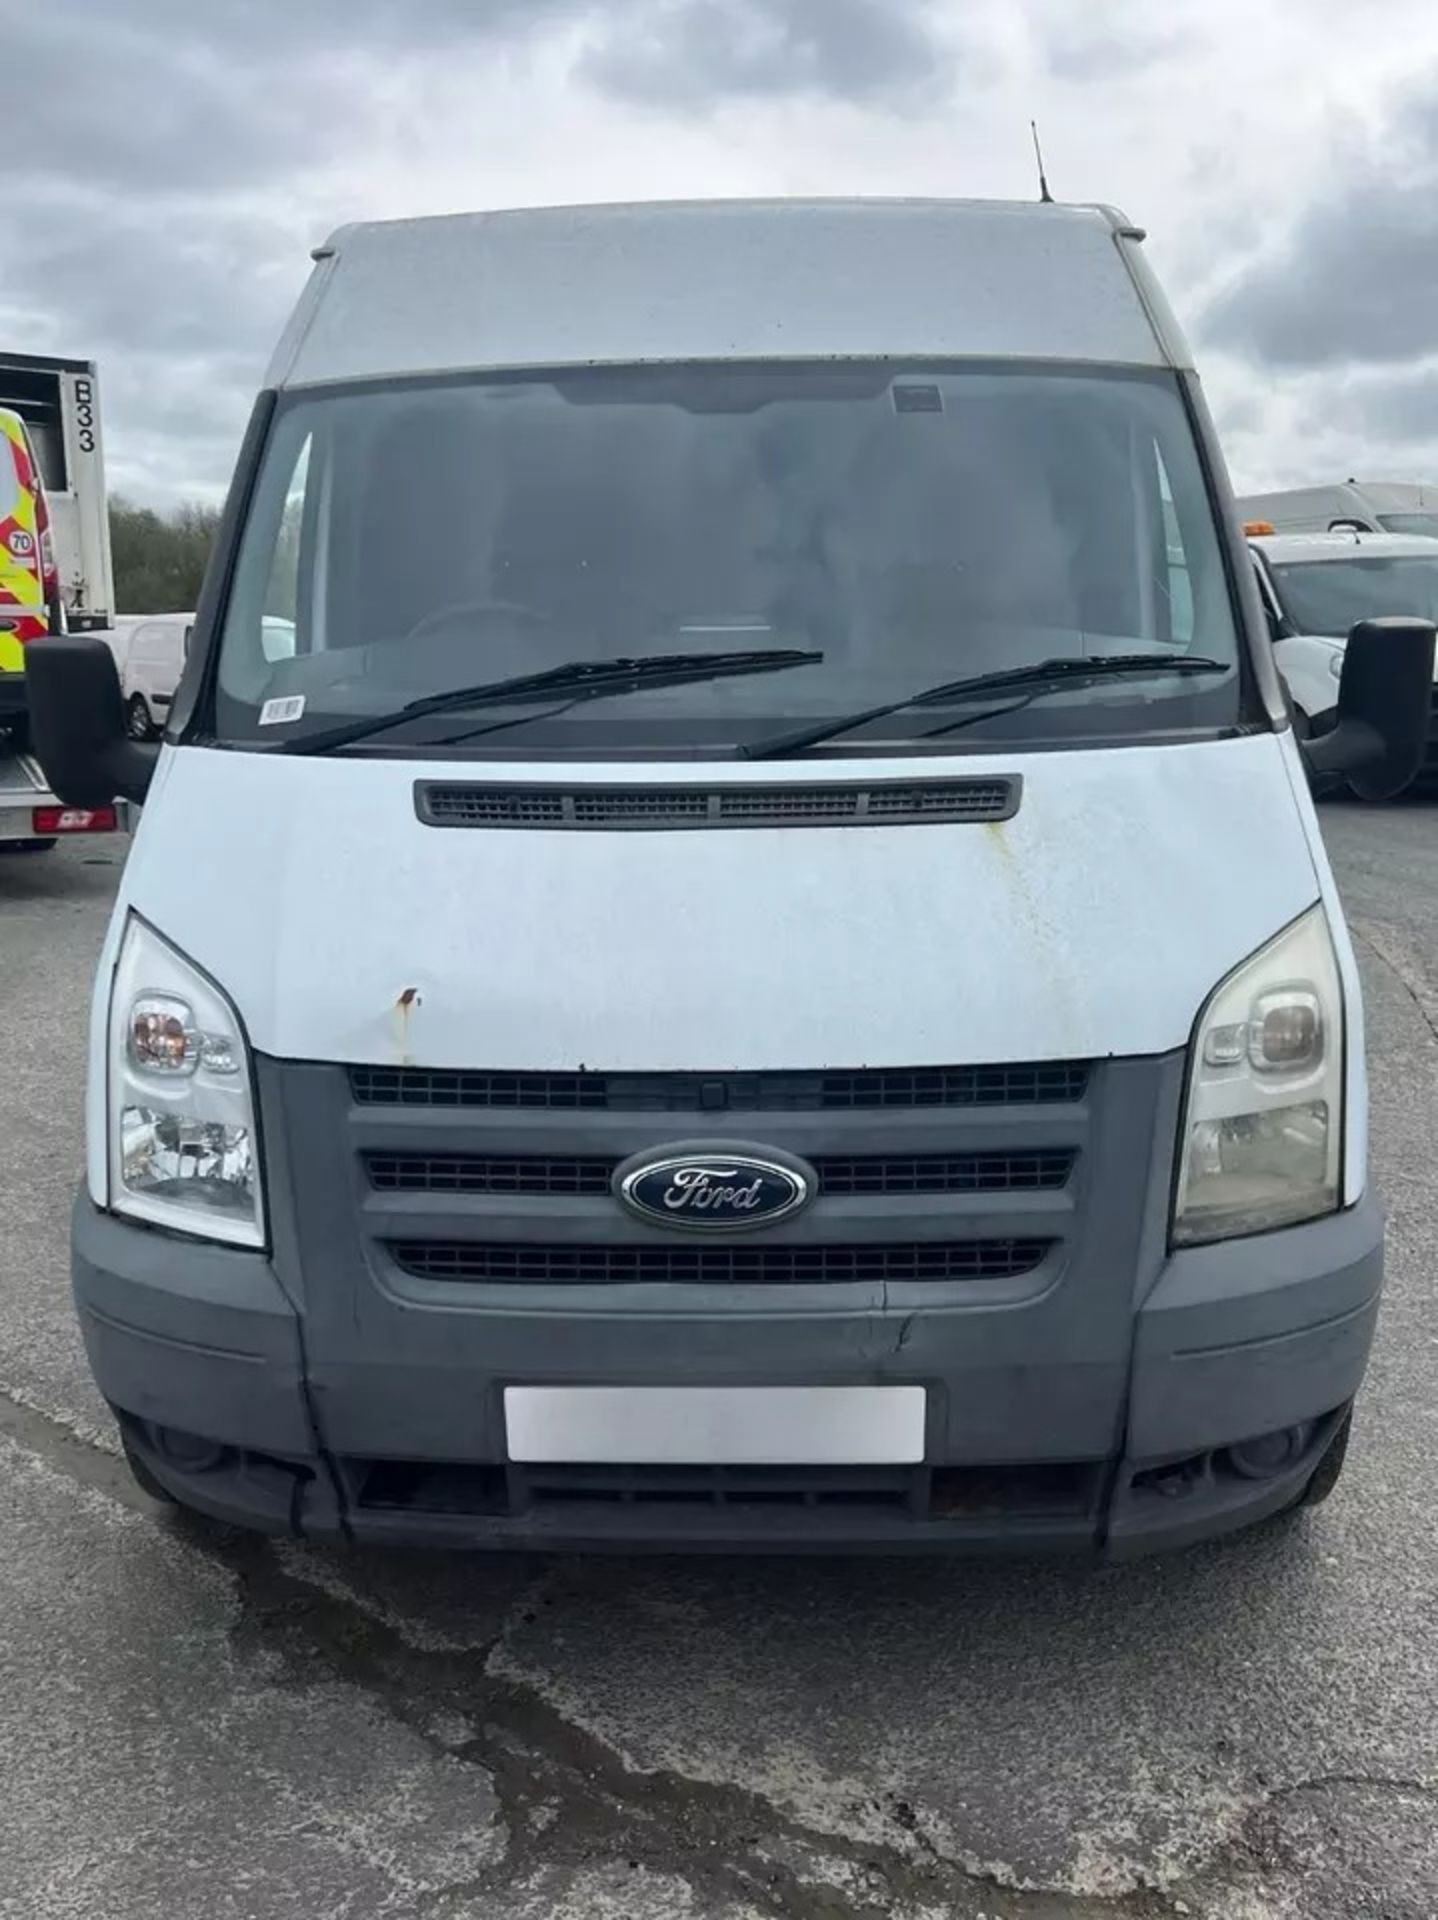 2011 FORD TRANSIT LWB PANEL VAN - IDEAL FOR REPAIR OR PARTS, 1 OWNER, HPI CLEAR - Image 12 of 20